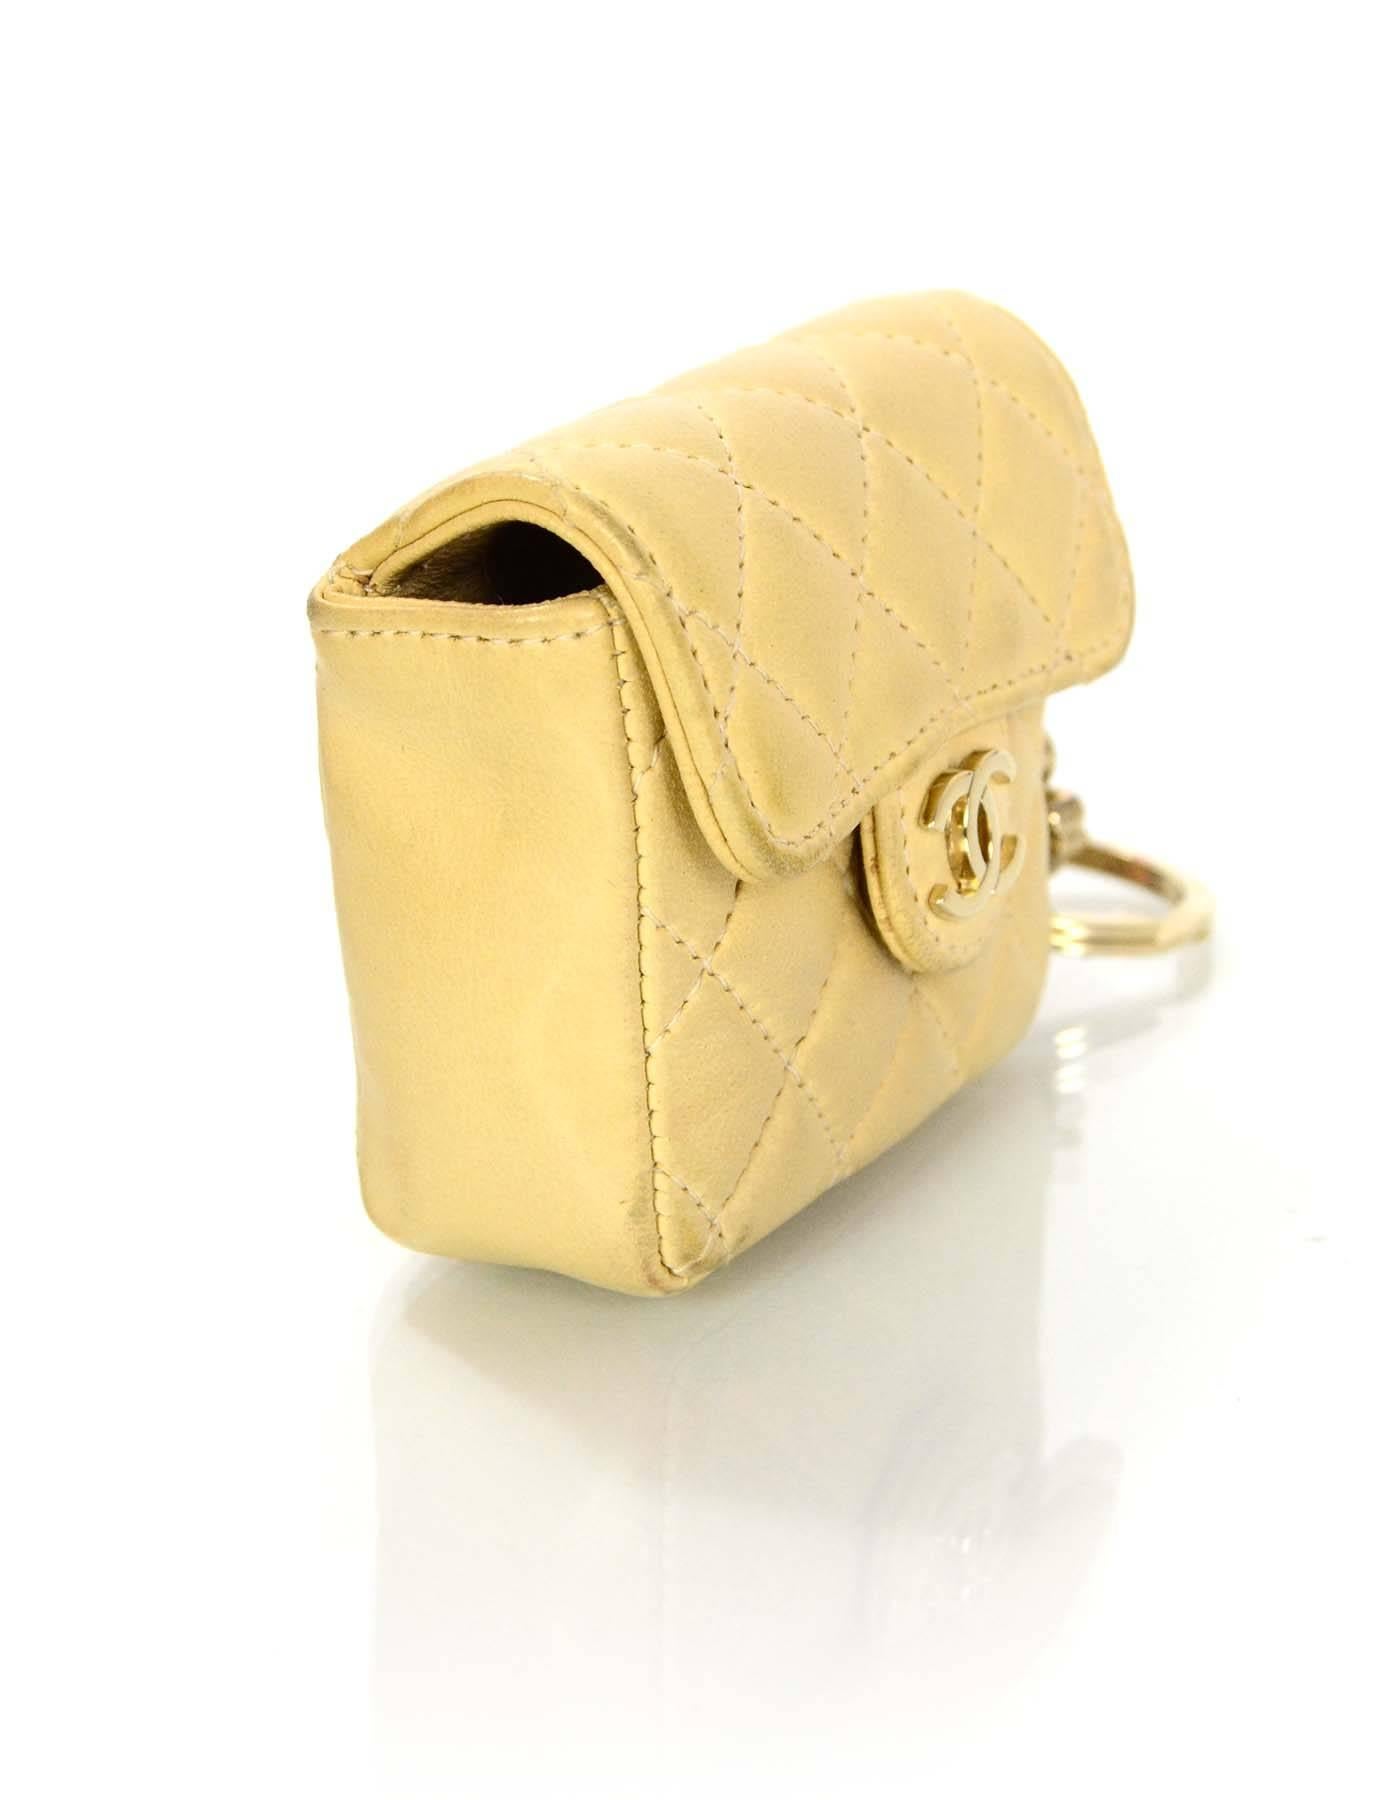 Chanel Beige Quilted Mini Flap Bag Key Ring 
Features iconic Coco, CC and four leaf clover charms attached

Made In: France
Year of Production: 2002-2003
Color: Beige
Hardware: Goldtone
Materials: Lambskin leather and metal
Lining: Beige